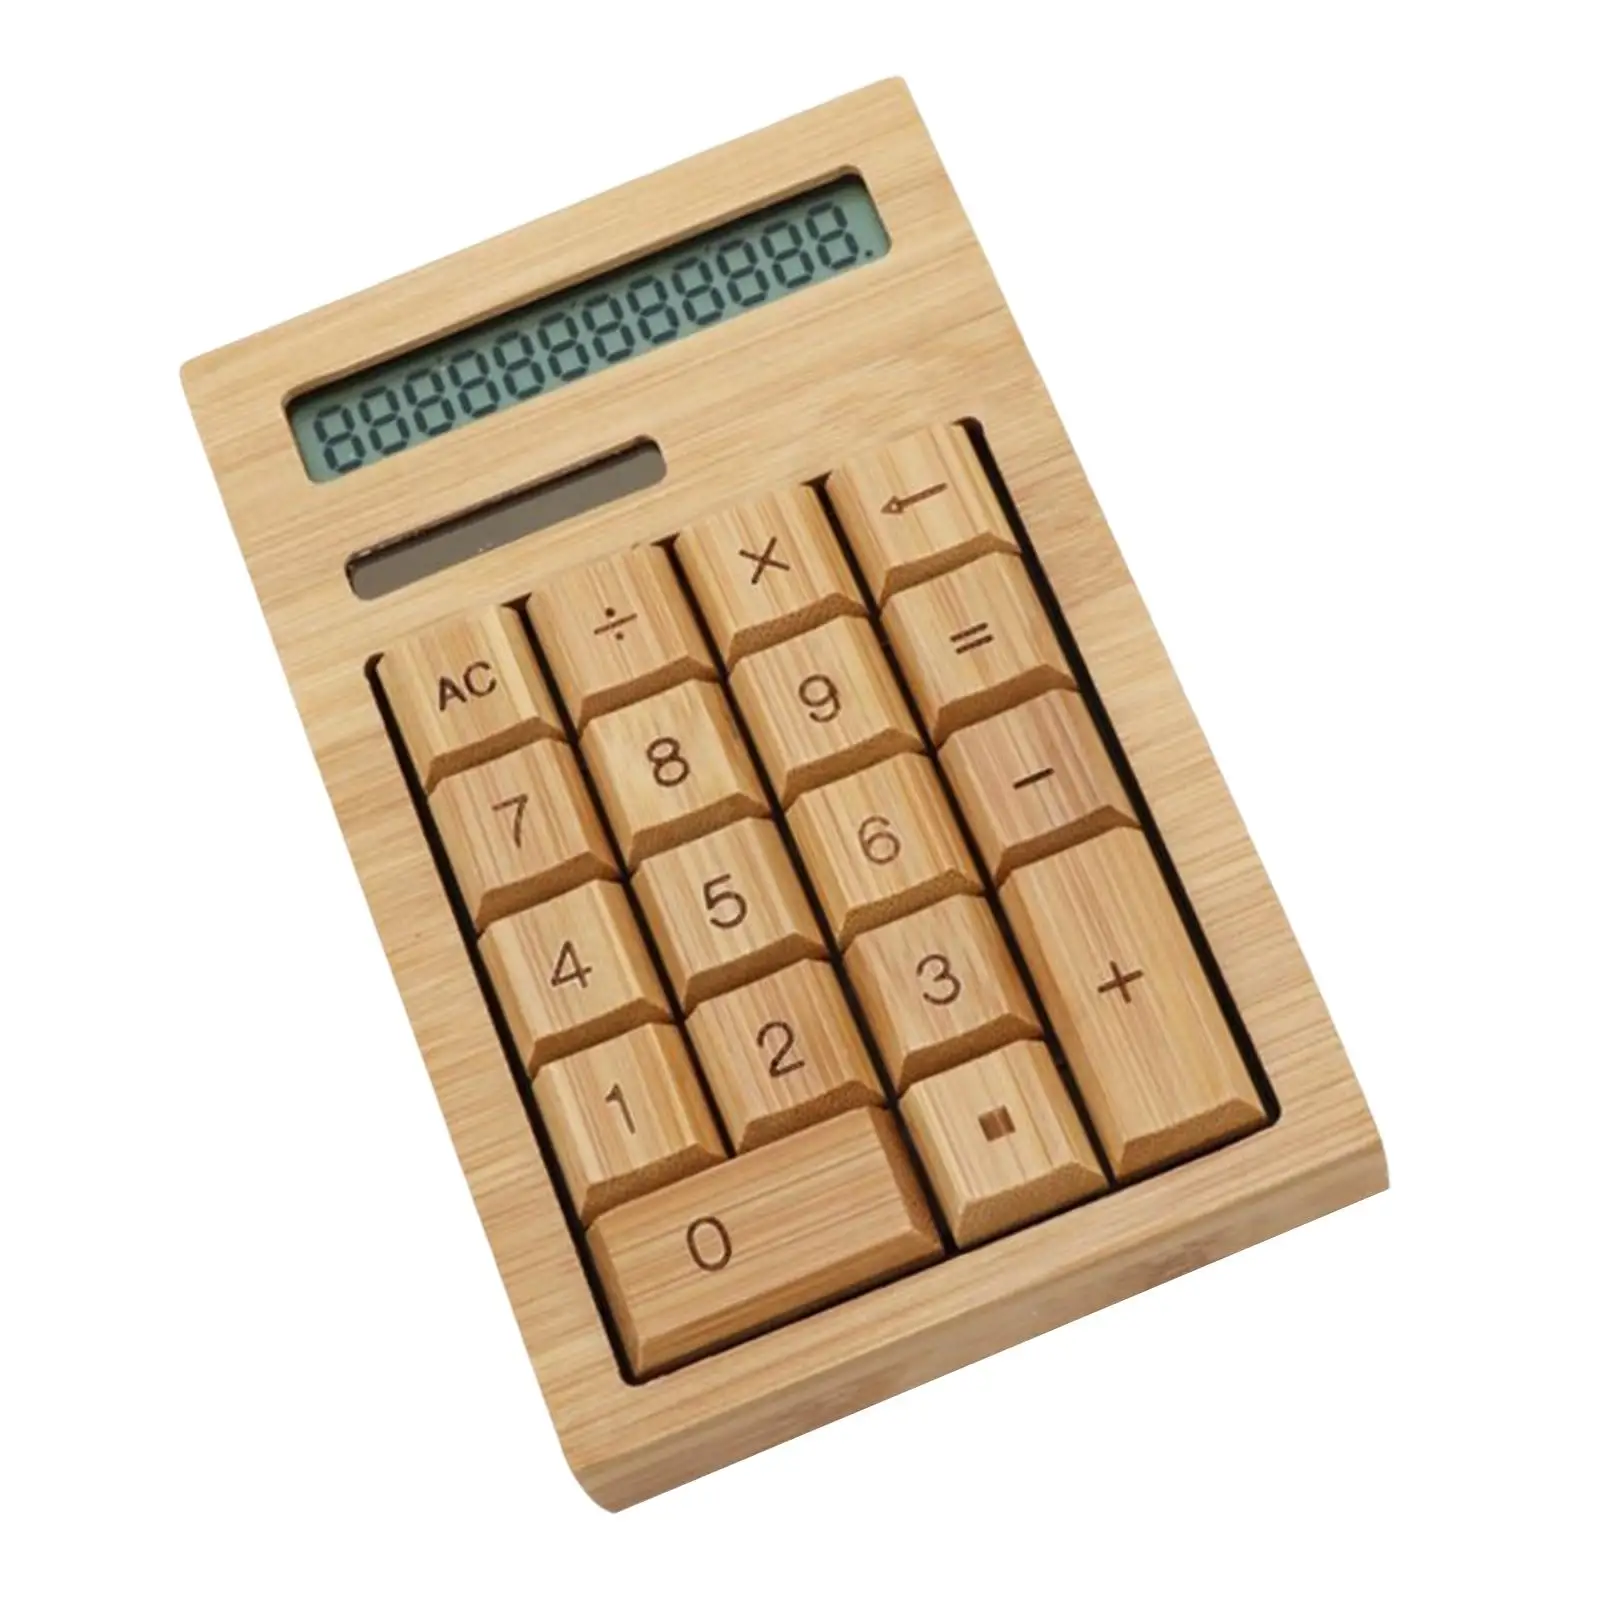 Bamboo Calculator Solar Power Waterproof Anti Static Functional Portable for Home